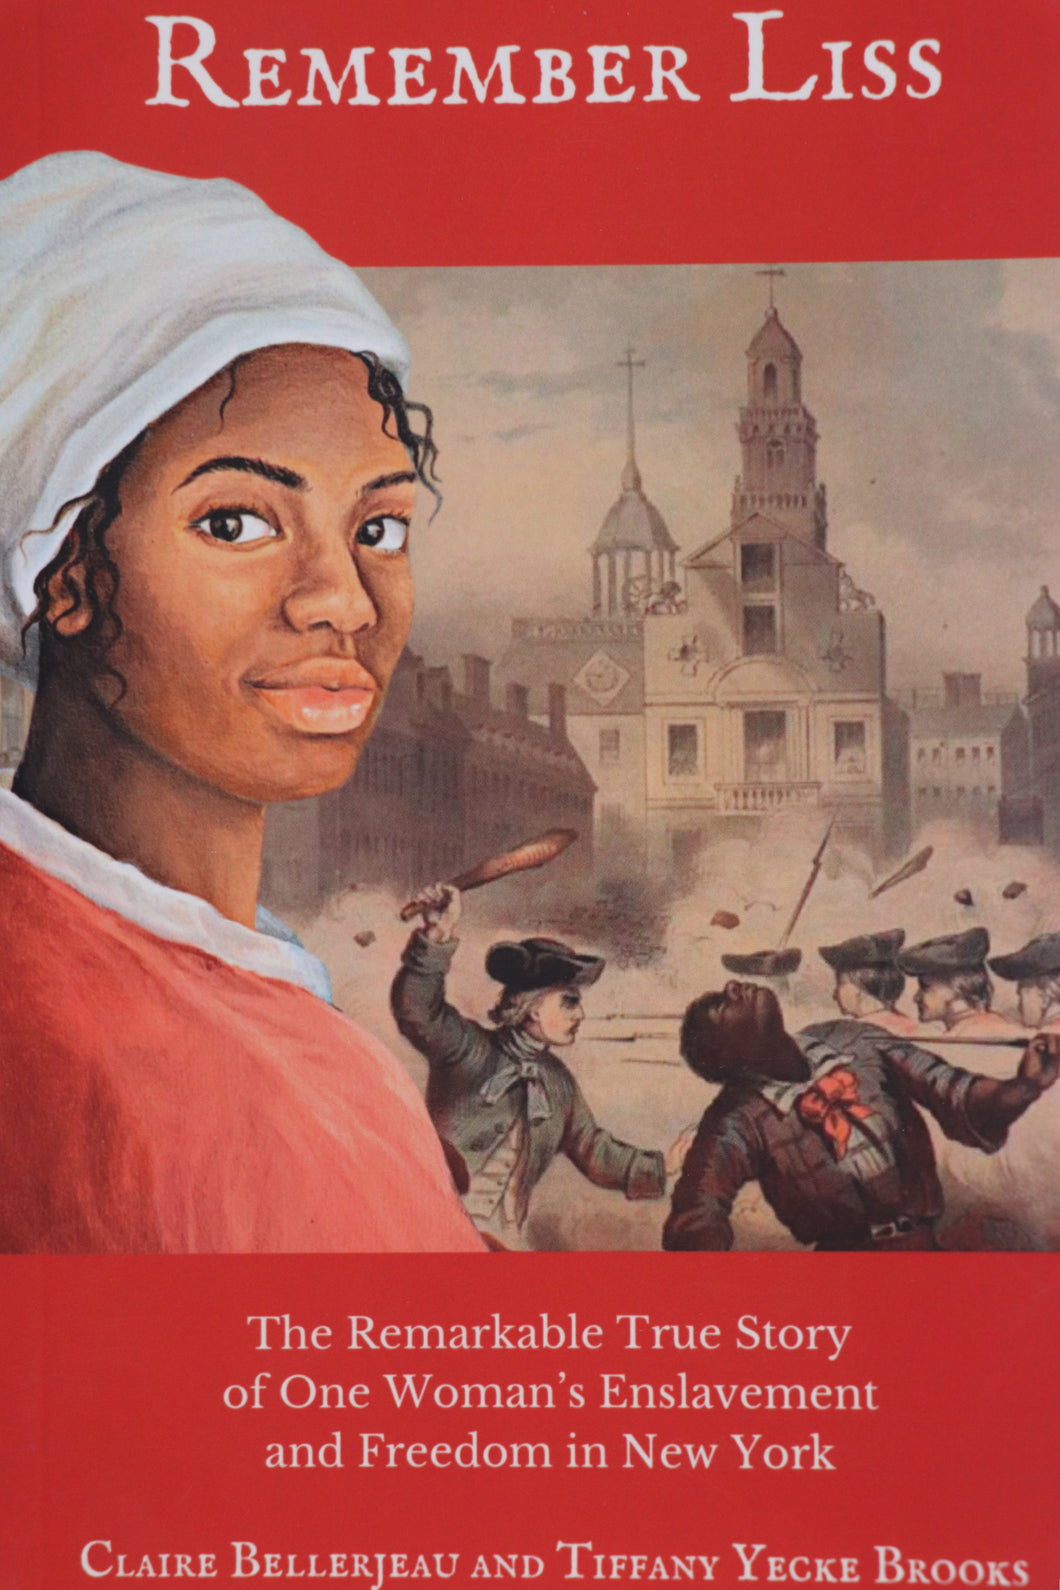 Remember Liss: The Remarkable True Story of One Woman's Enslavement and Freedom in New York